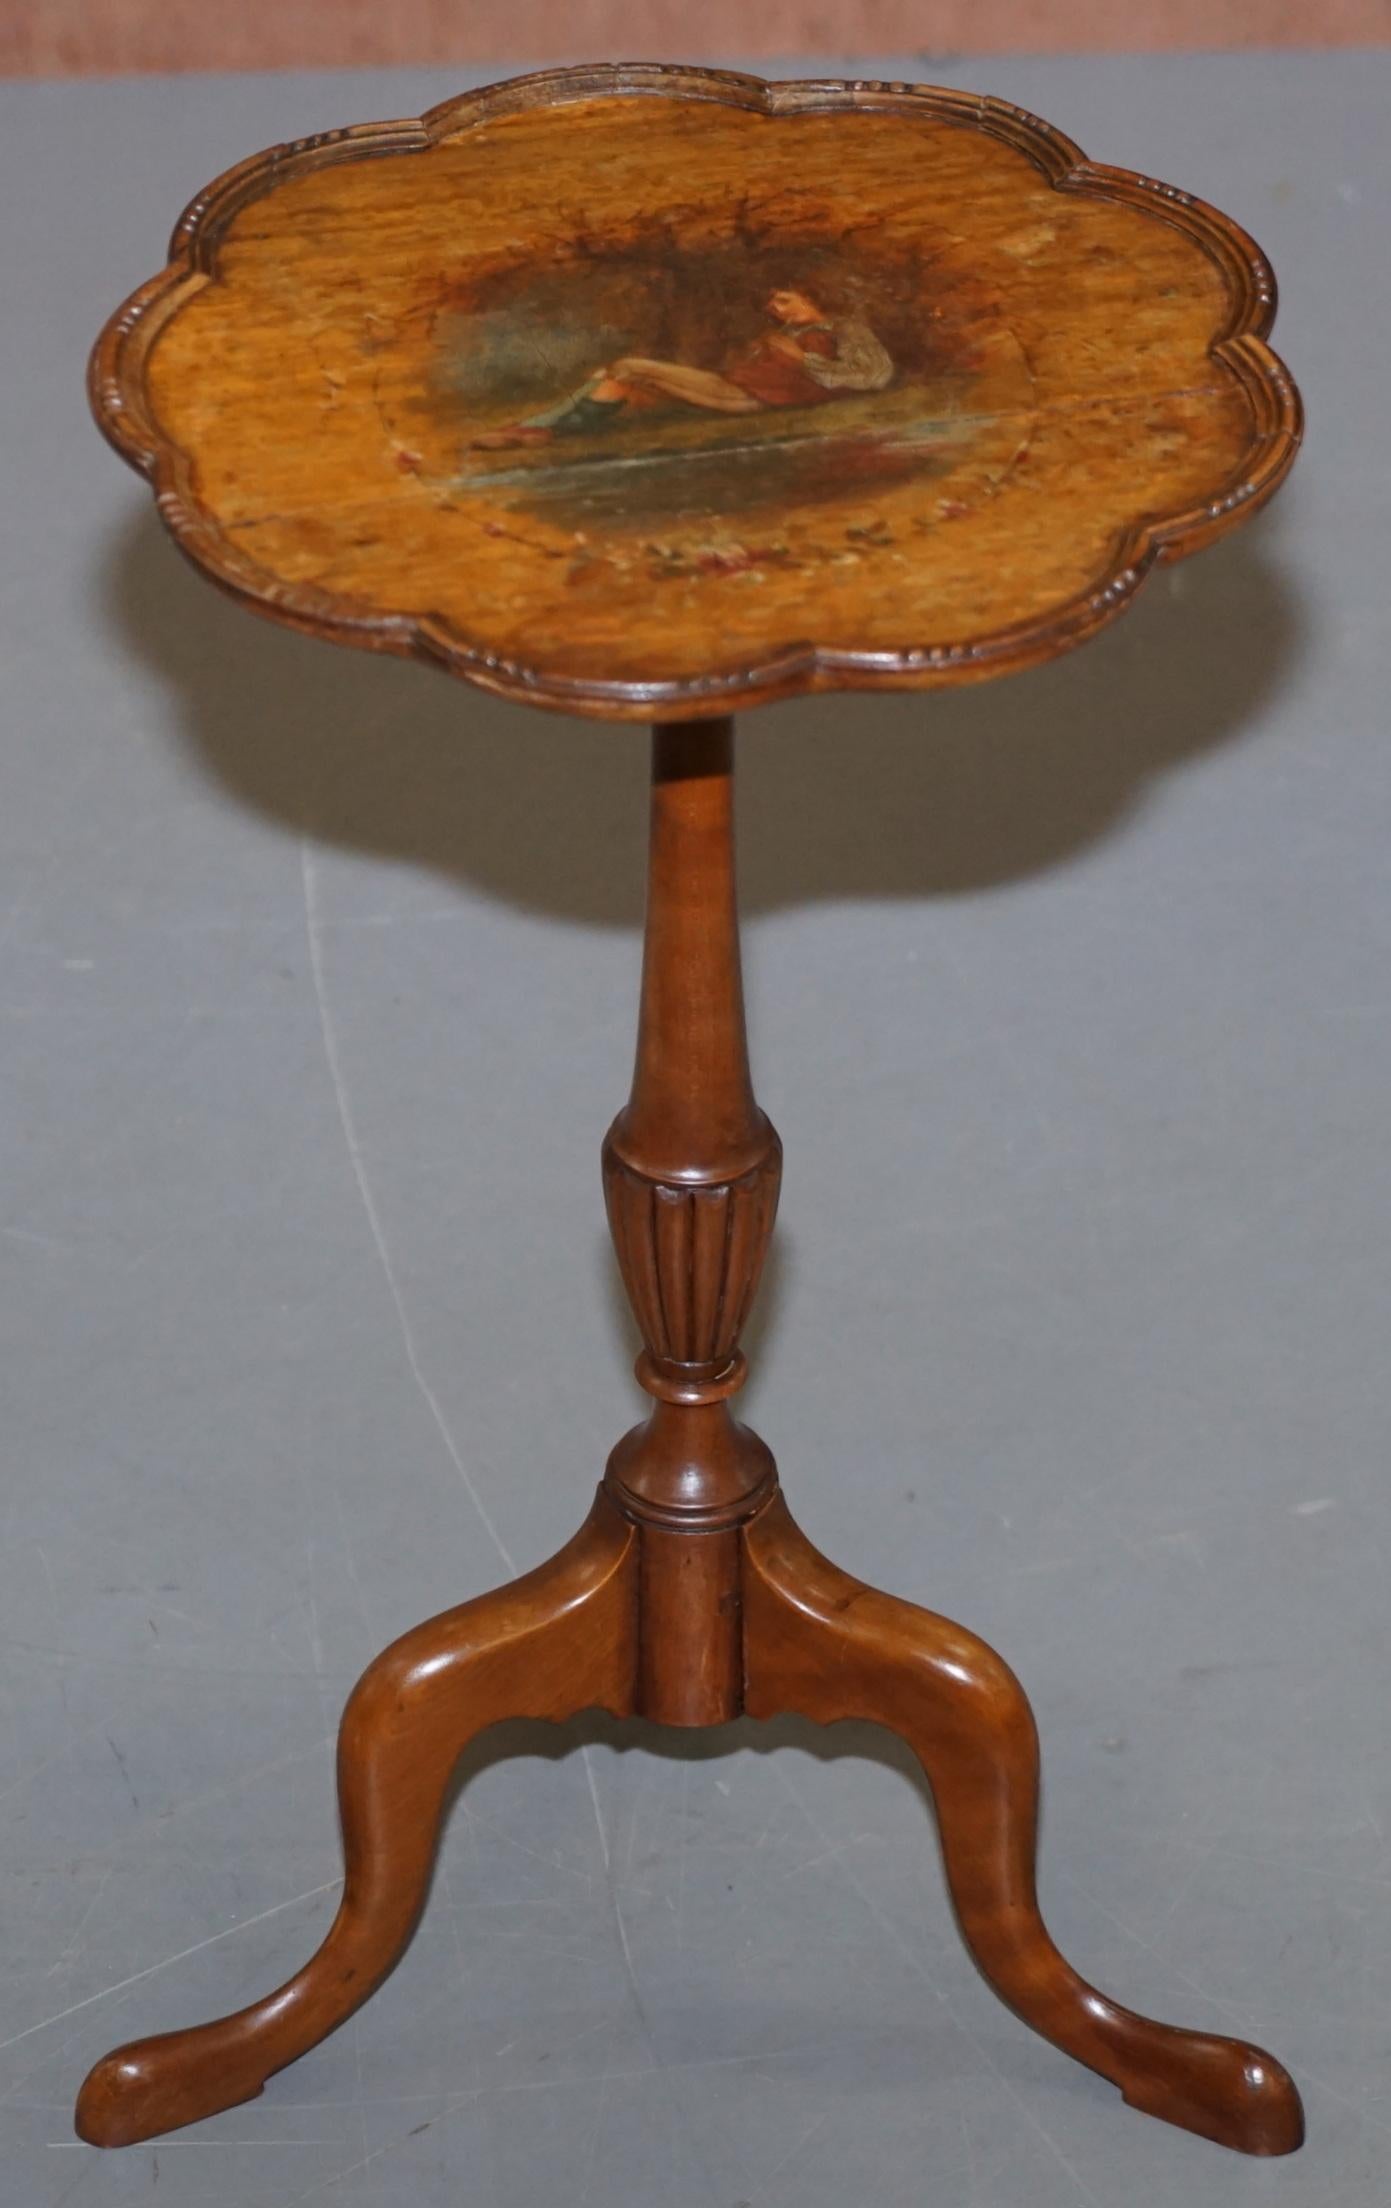 We are delighted to offer for sale this lovely mahogany Sheraton Revival hand painted lamp or wine table

A very good looking and well made piece, it mahogany with decorative Sheraton Revival painted piper boy to the top

We have cleaned waxed